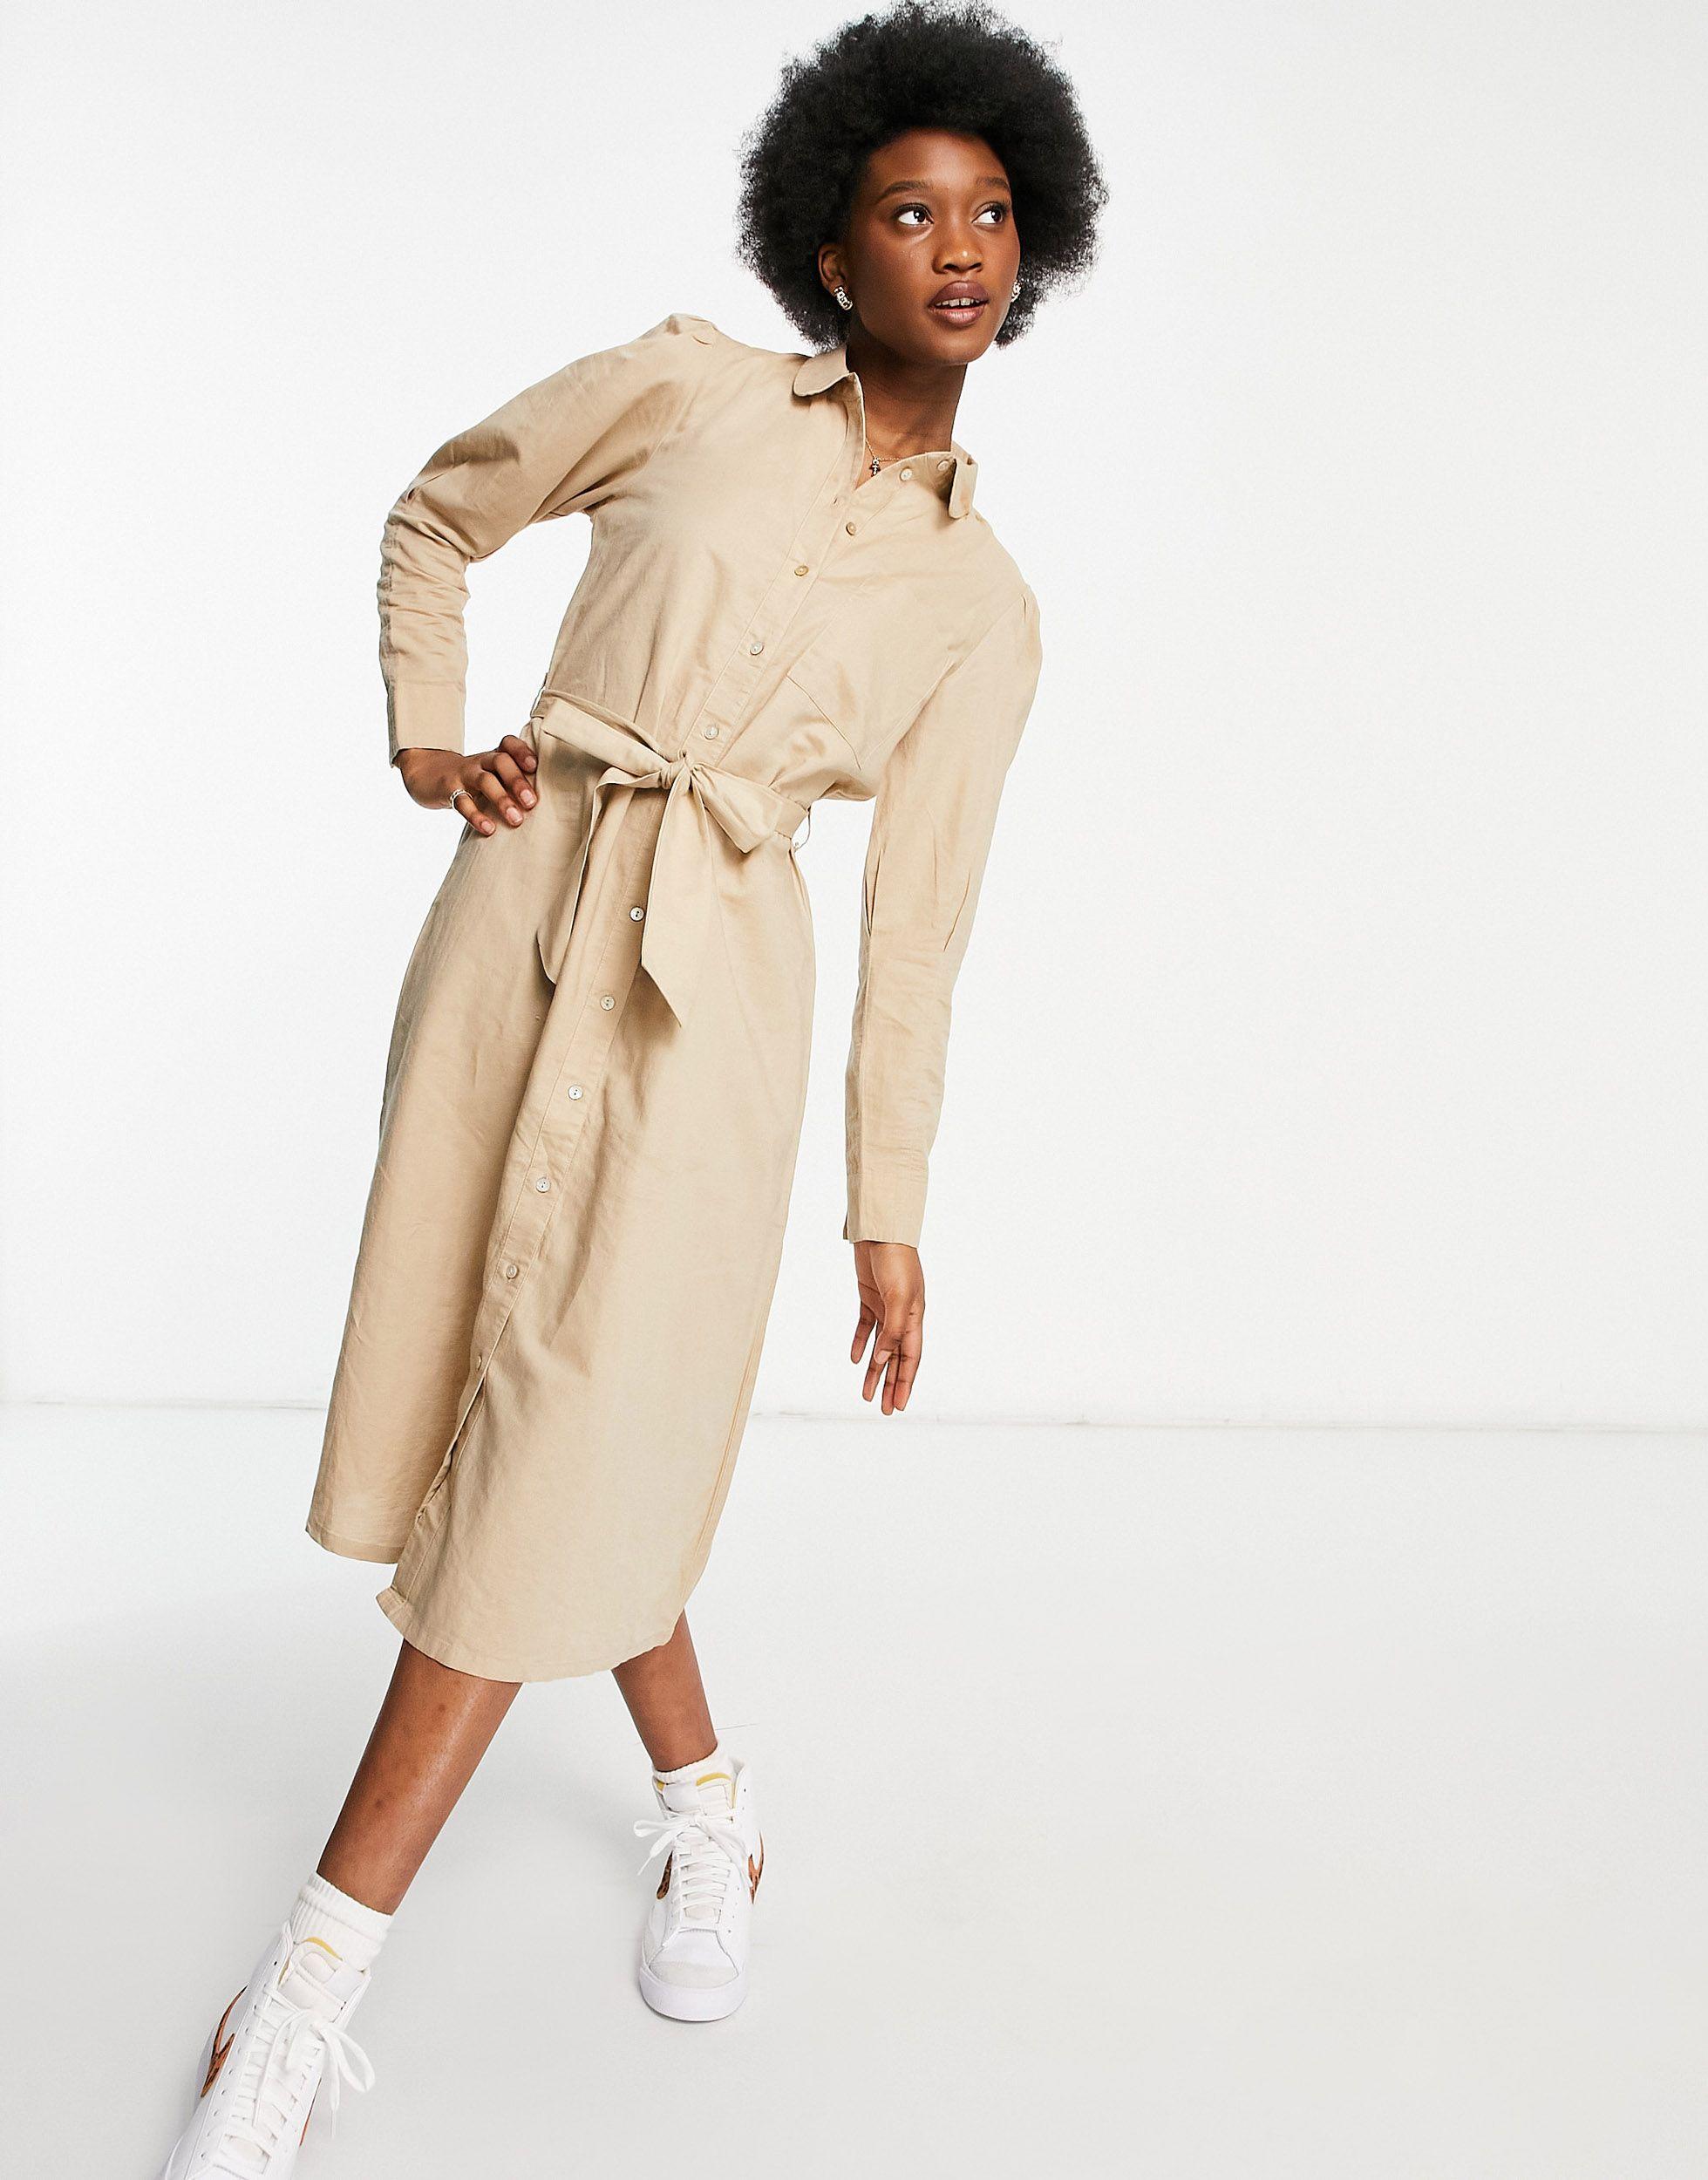 SELECTED Femme Linen Midi Dress With Tie Waist Detail in Natural | Lyst  Australia